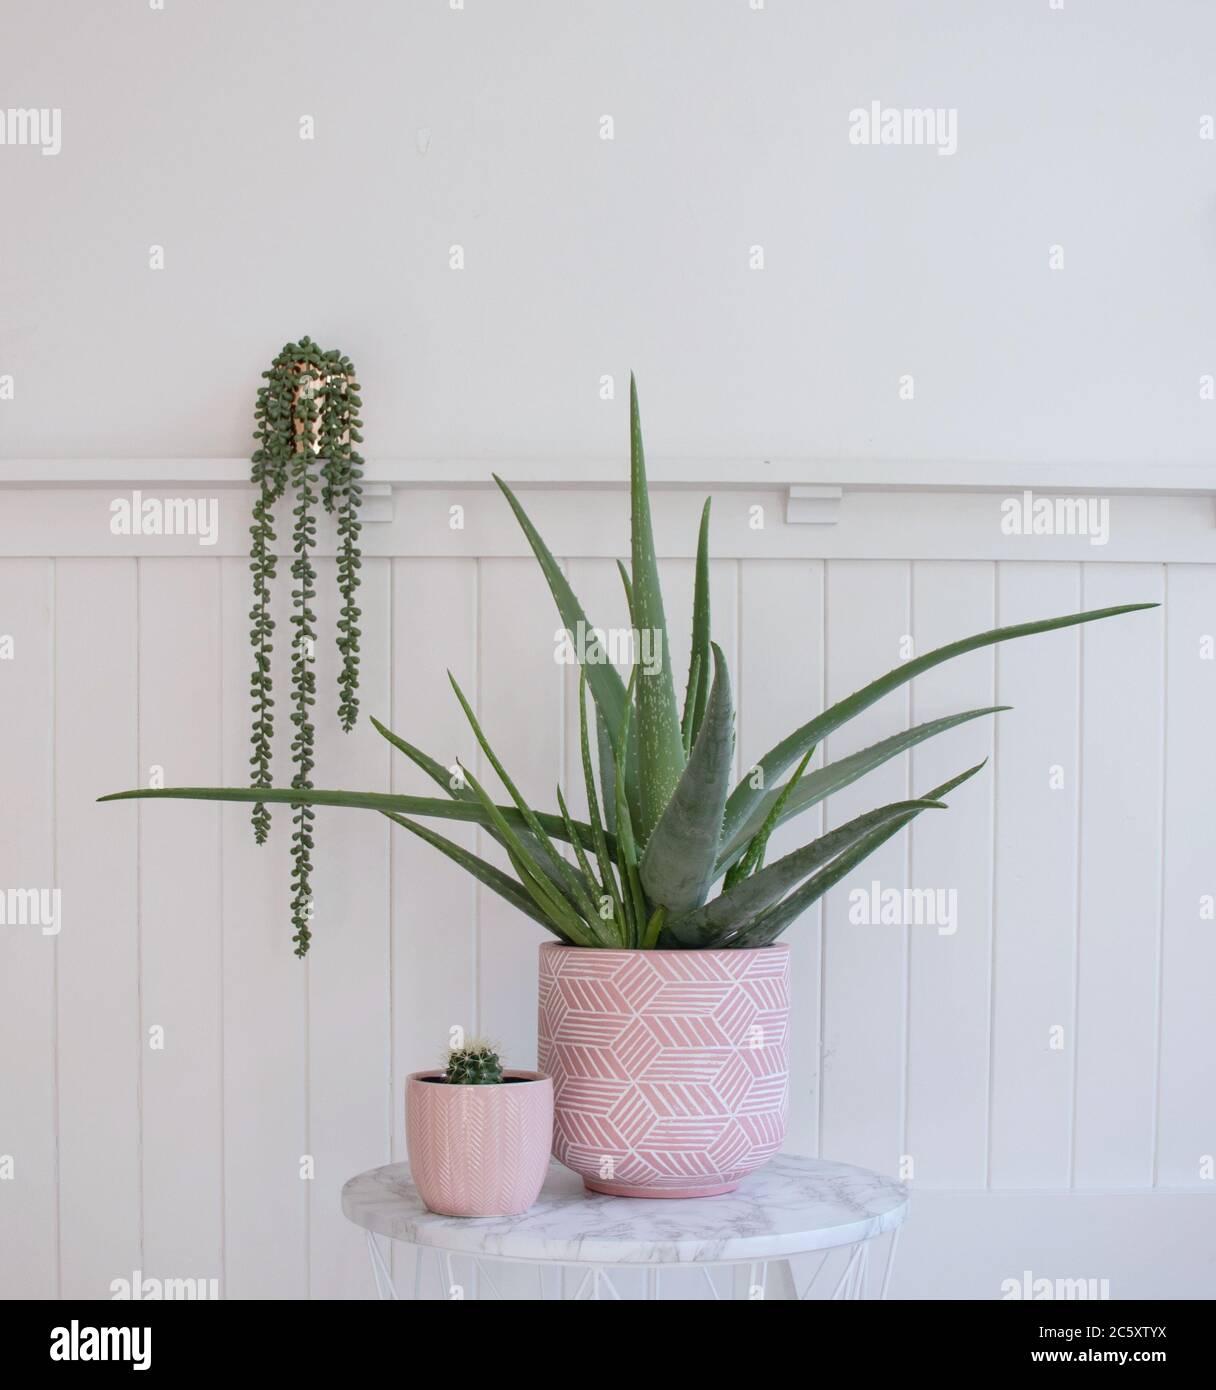 Aloe Vera plant and small cactus potted plants in pink pots in white room Stock Photo